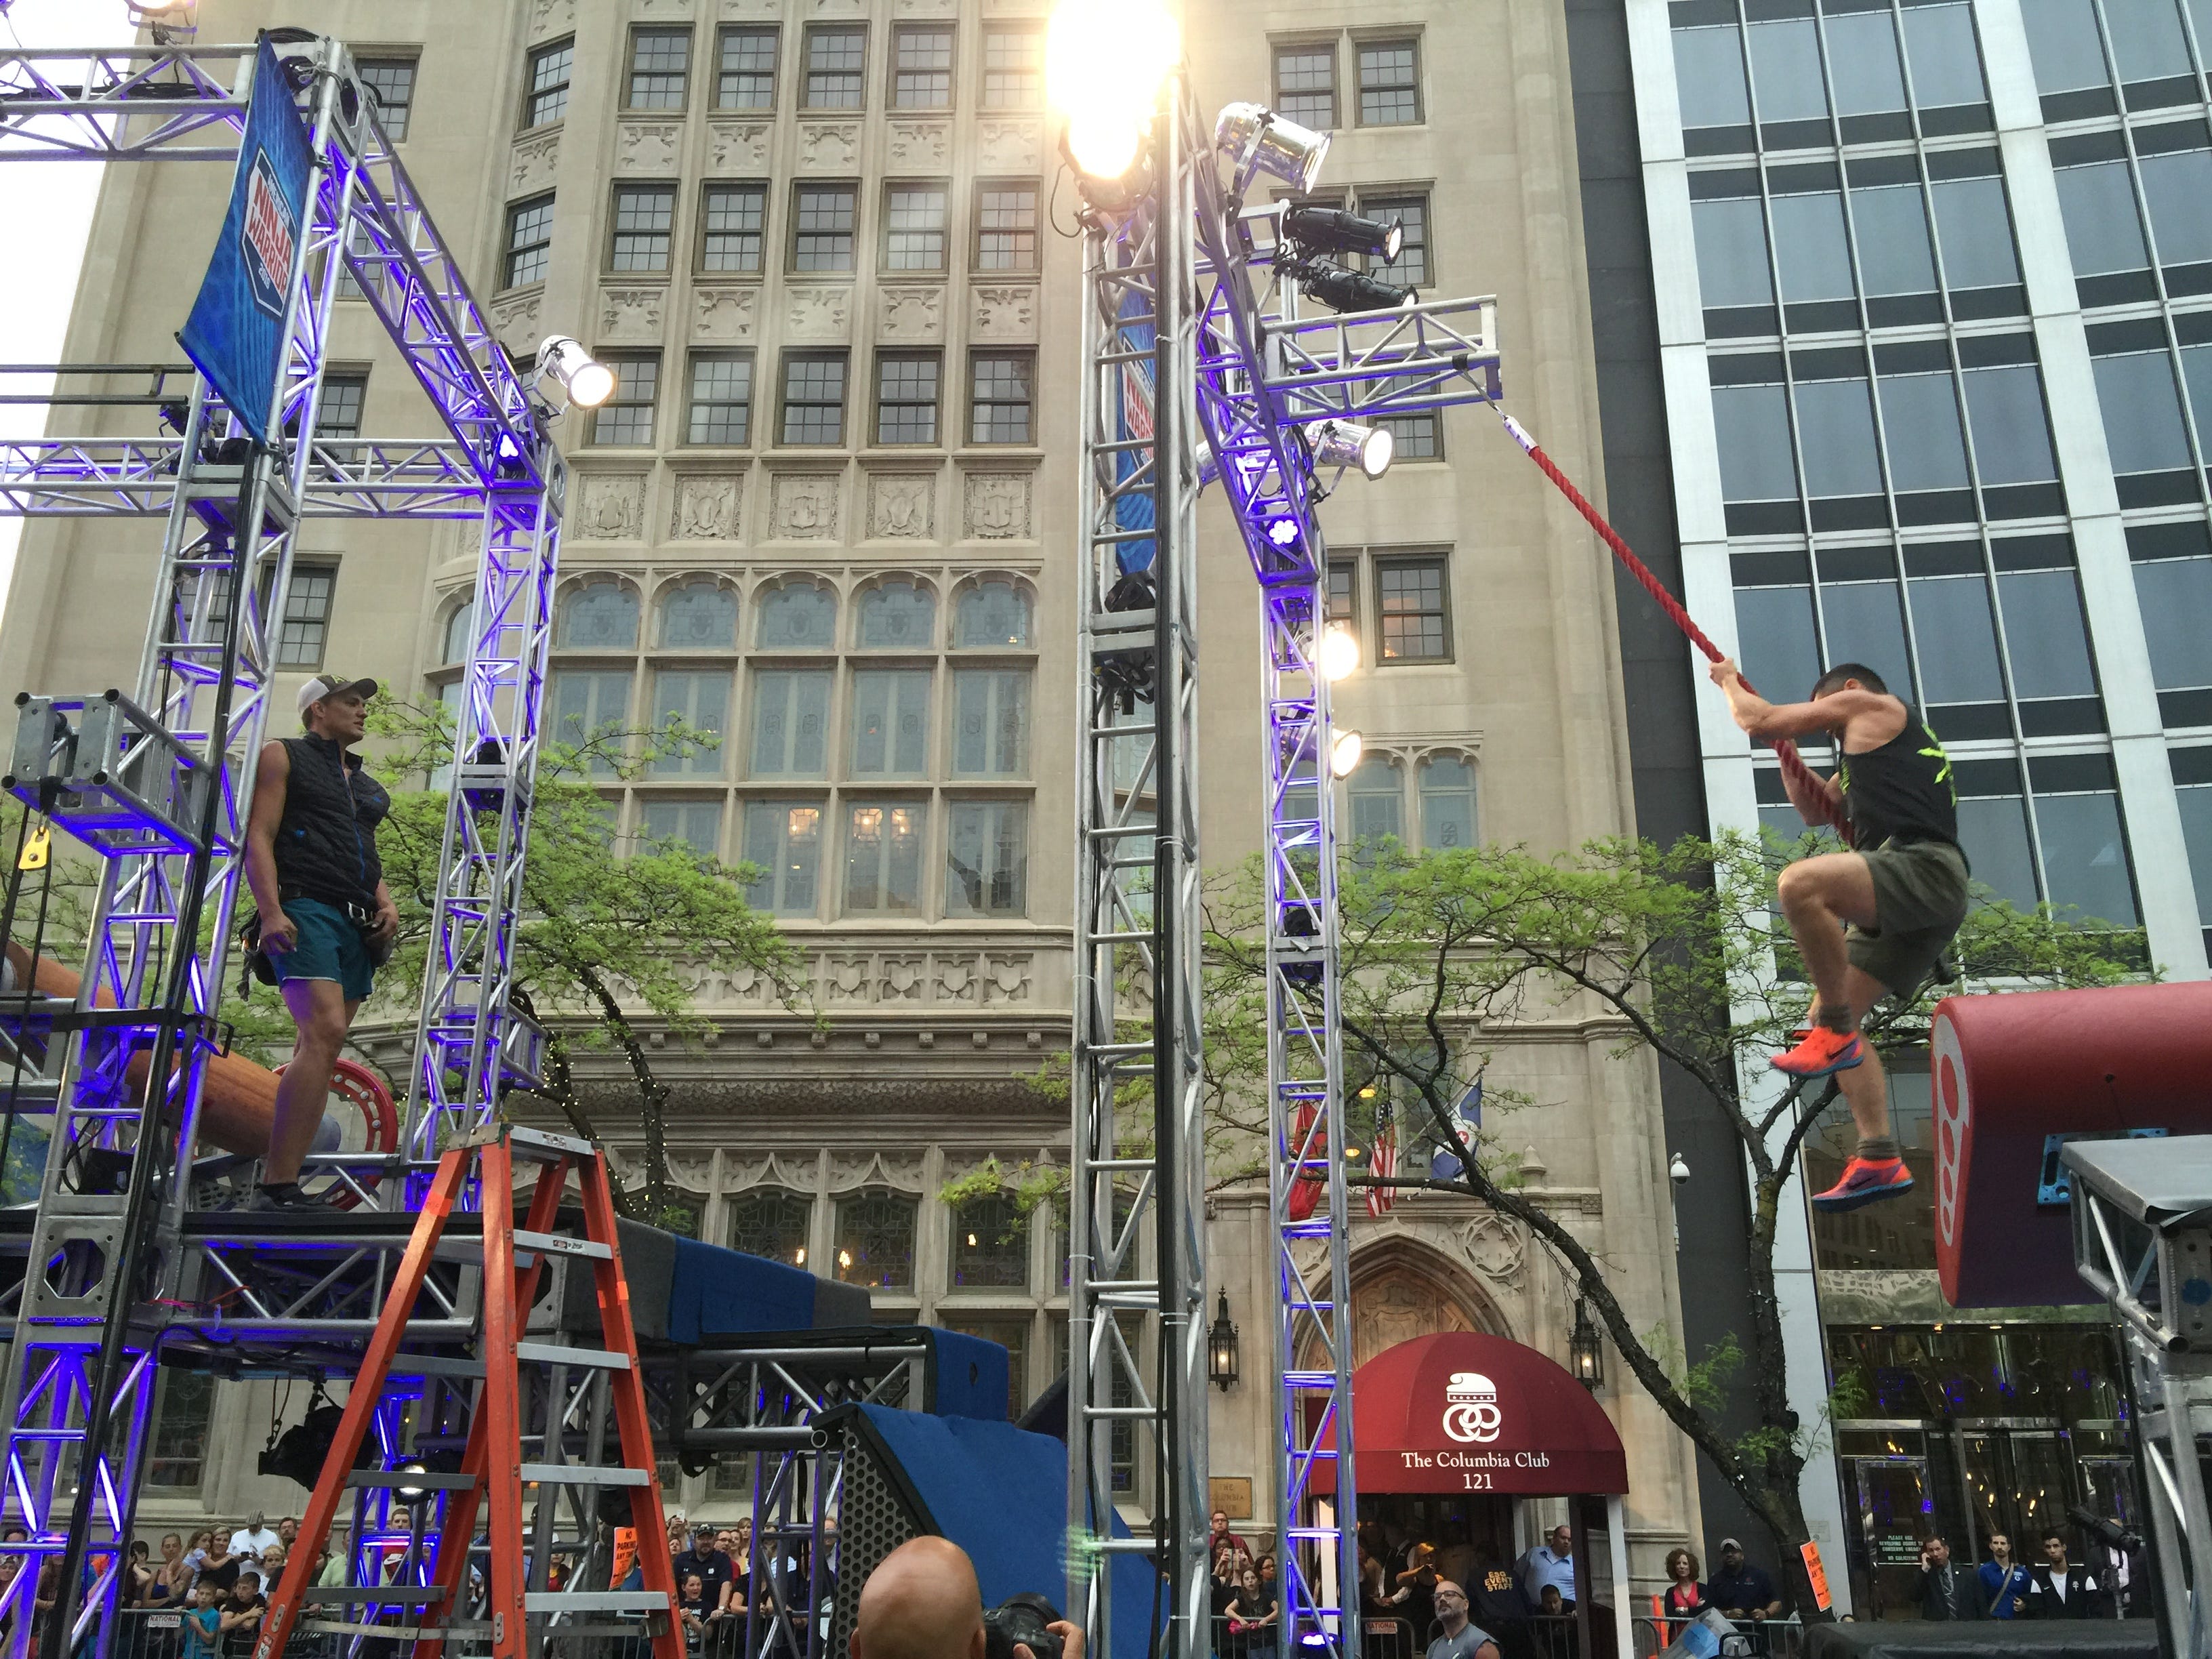 &apos;American Ninja Warrior&apos; is coming back to shoot in Indy